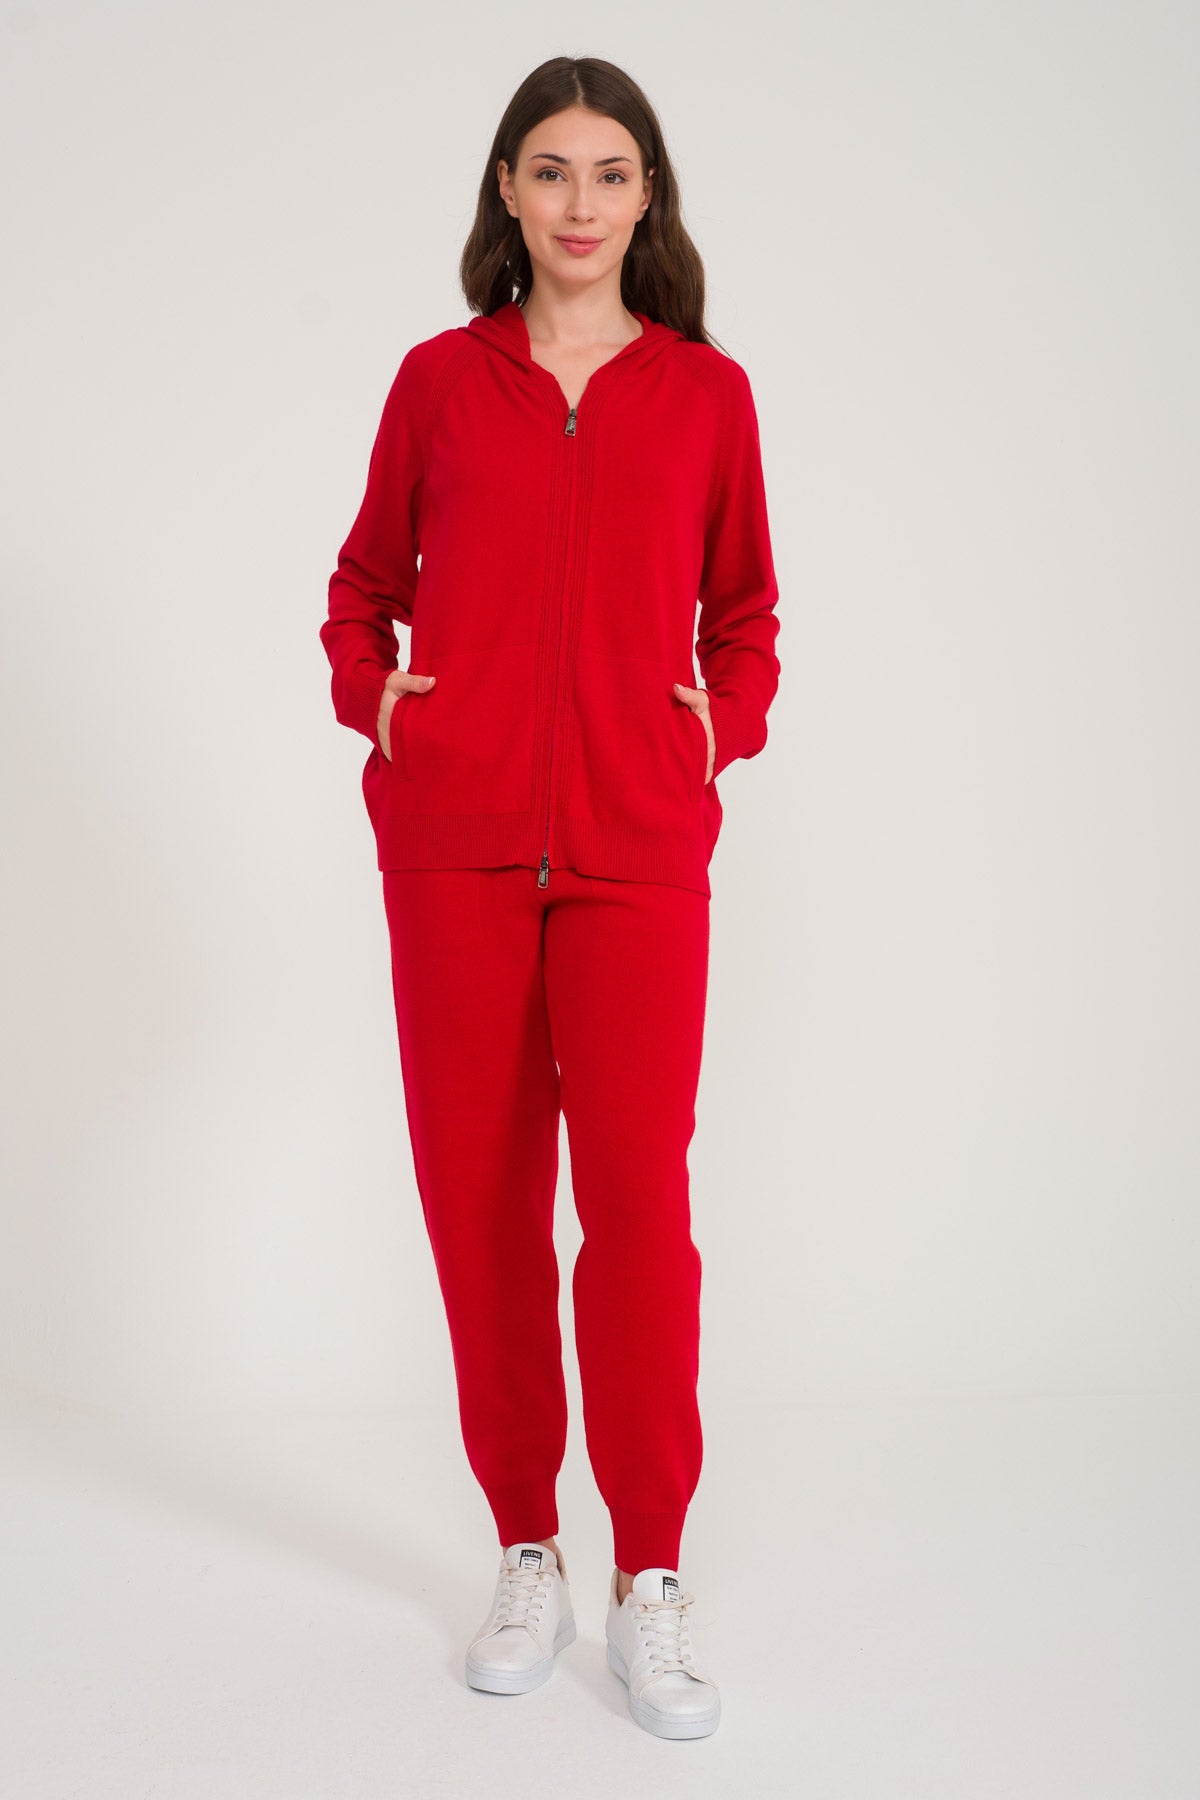 Red Knit Sweater & Pants Set